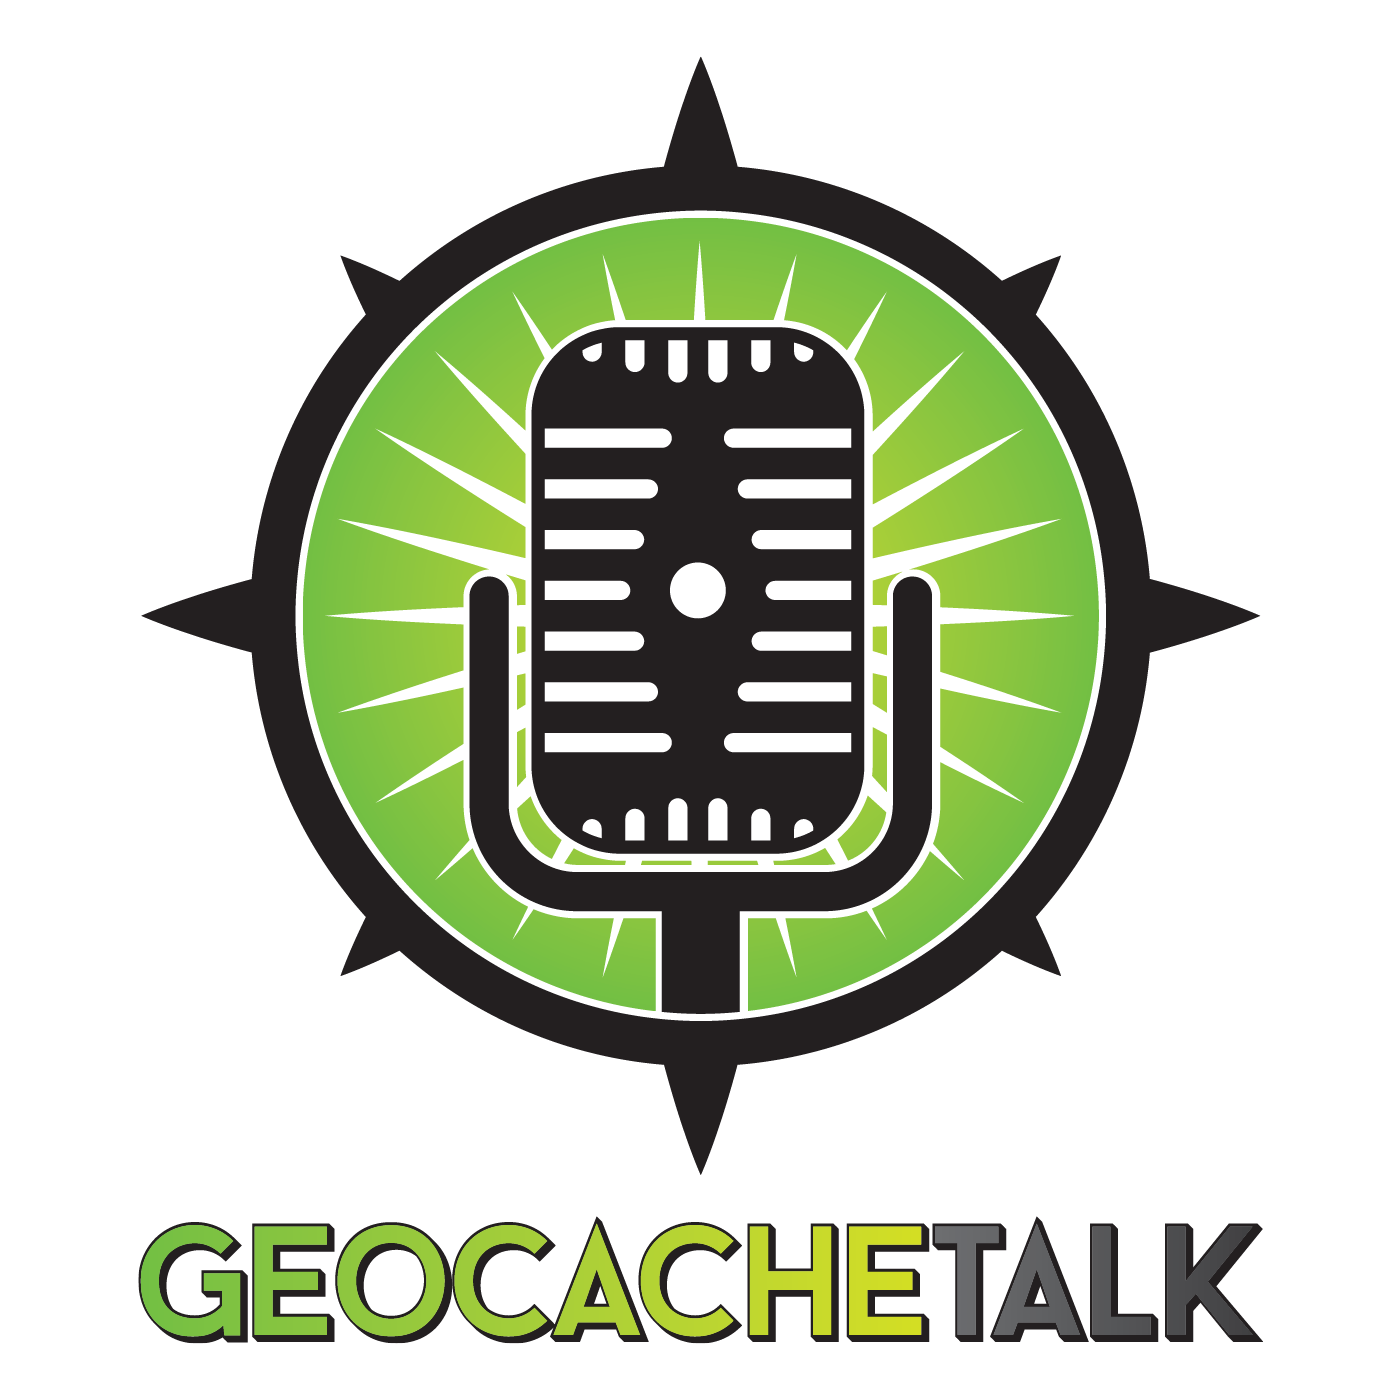 Show 21 - Halloween Geocaching with Limax